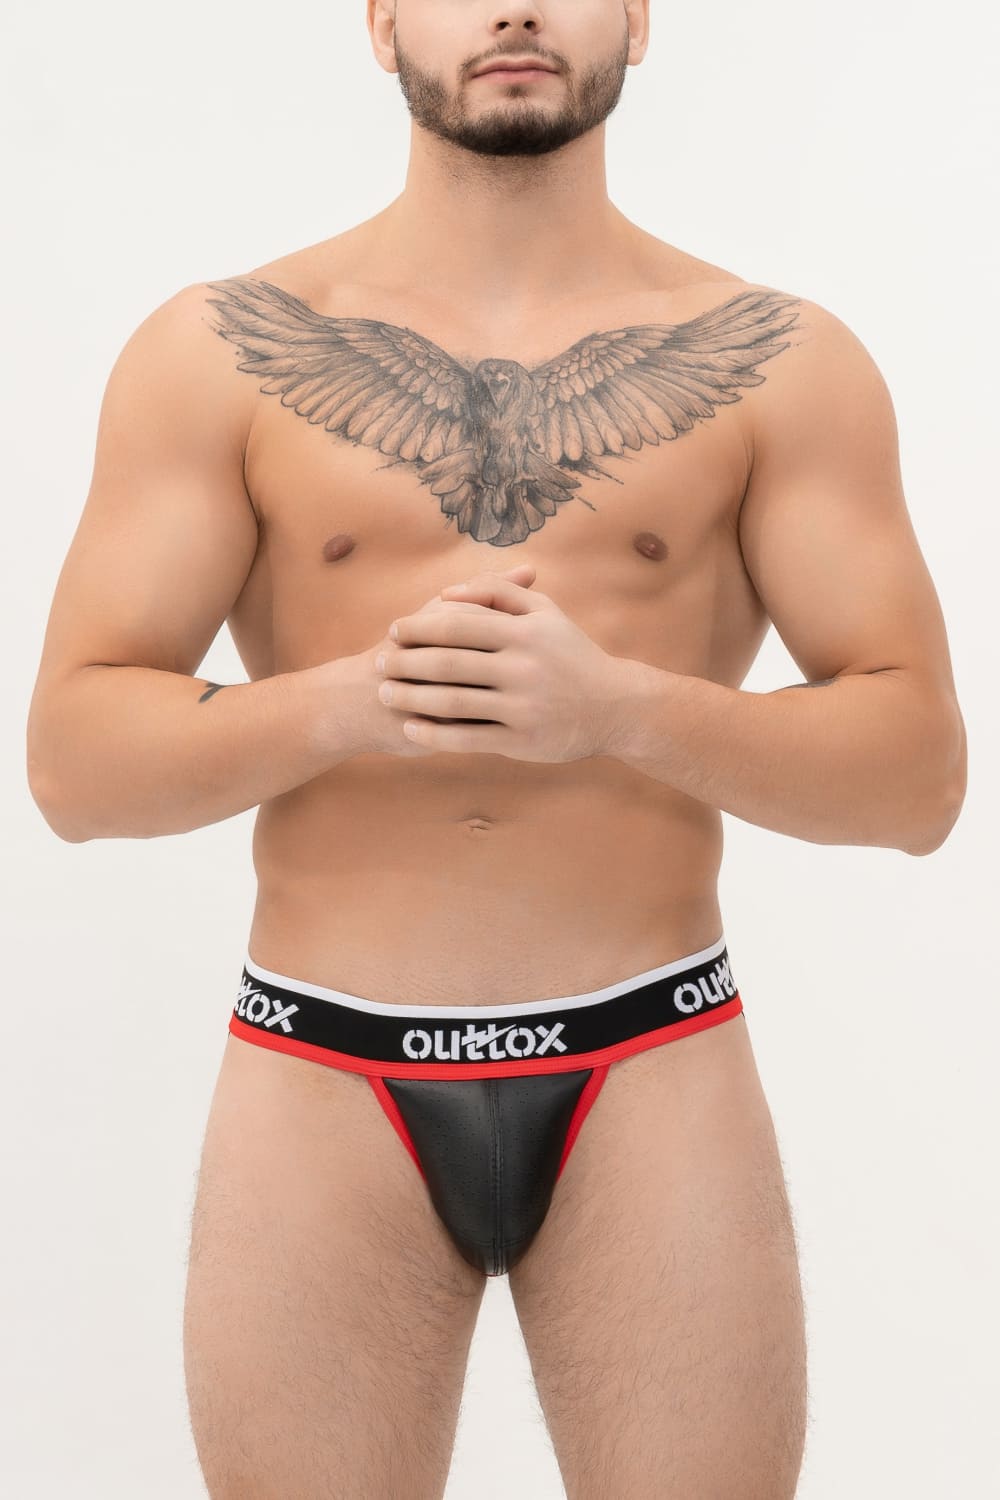 Outtox. Jock with Snap Codpiece. Black+Red